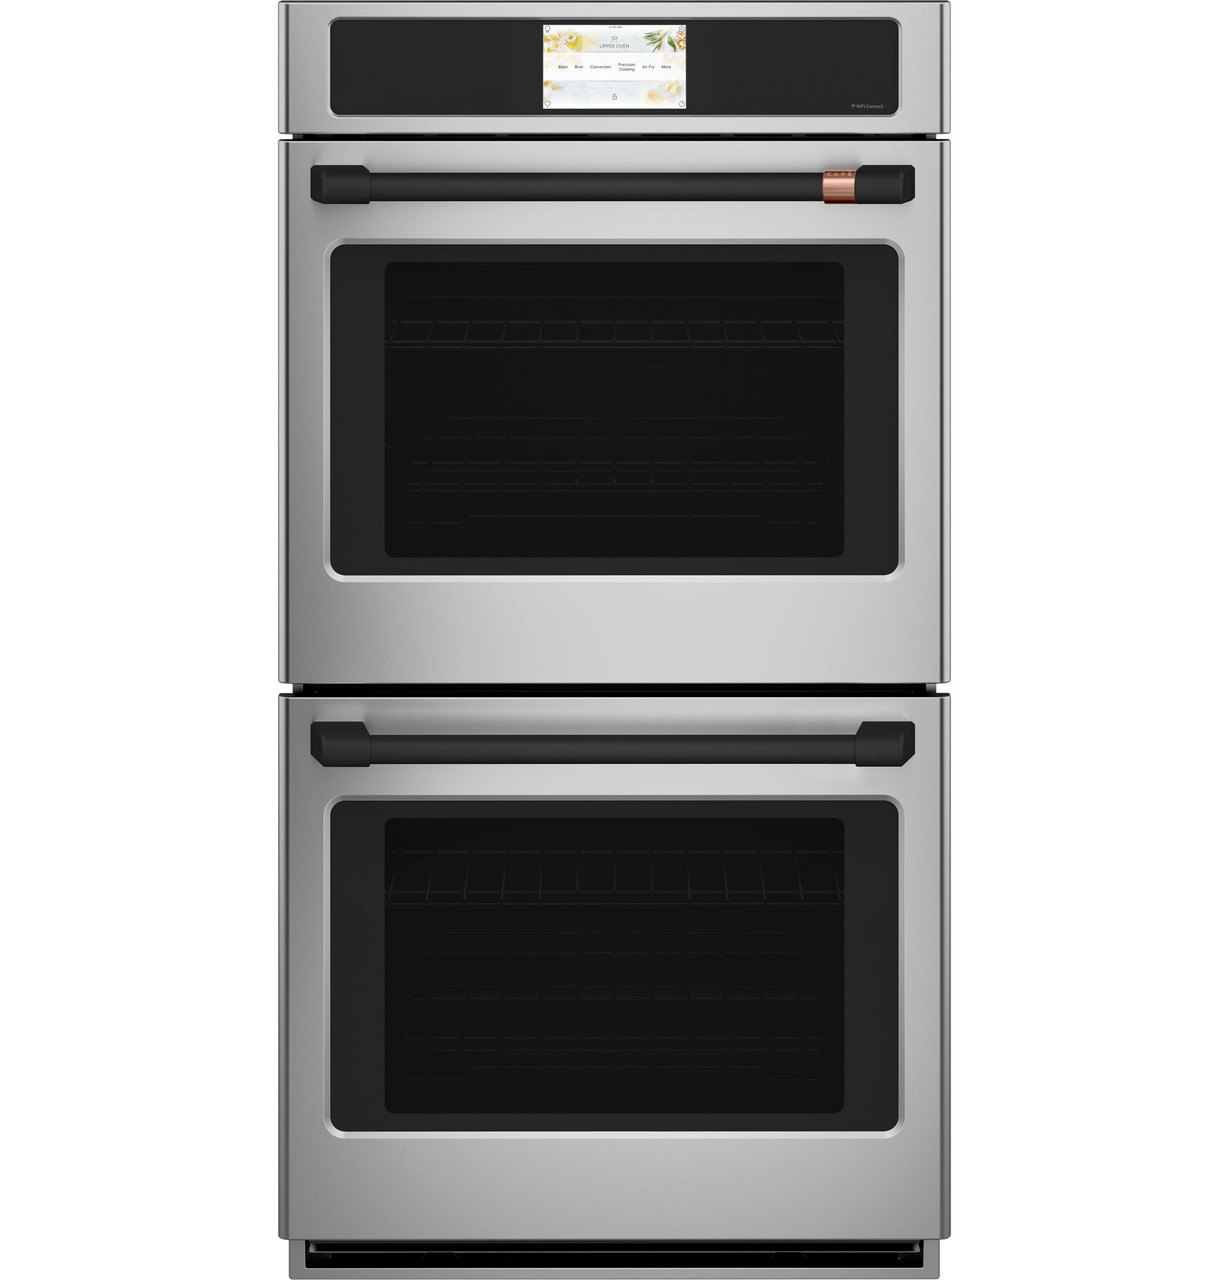 4 Types of Wall Ovens